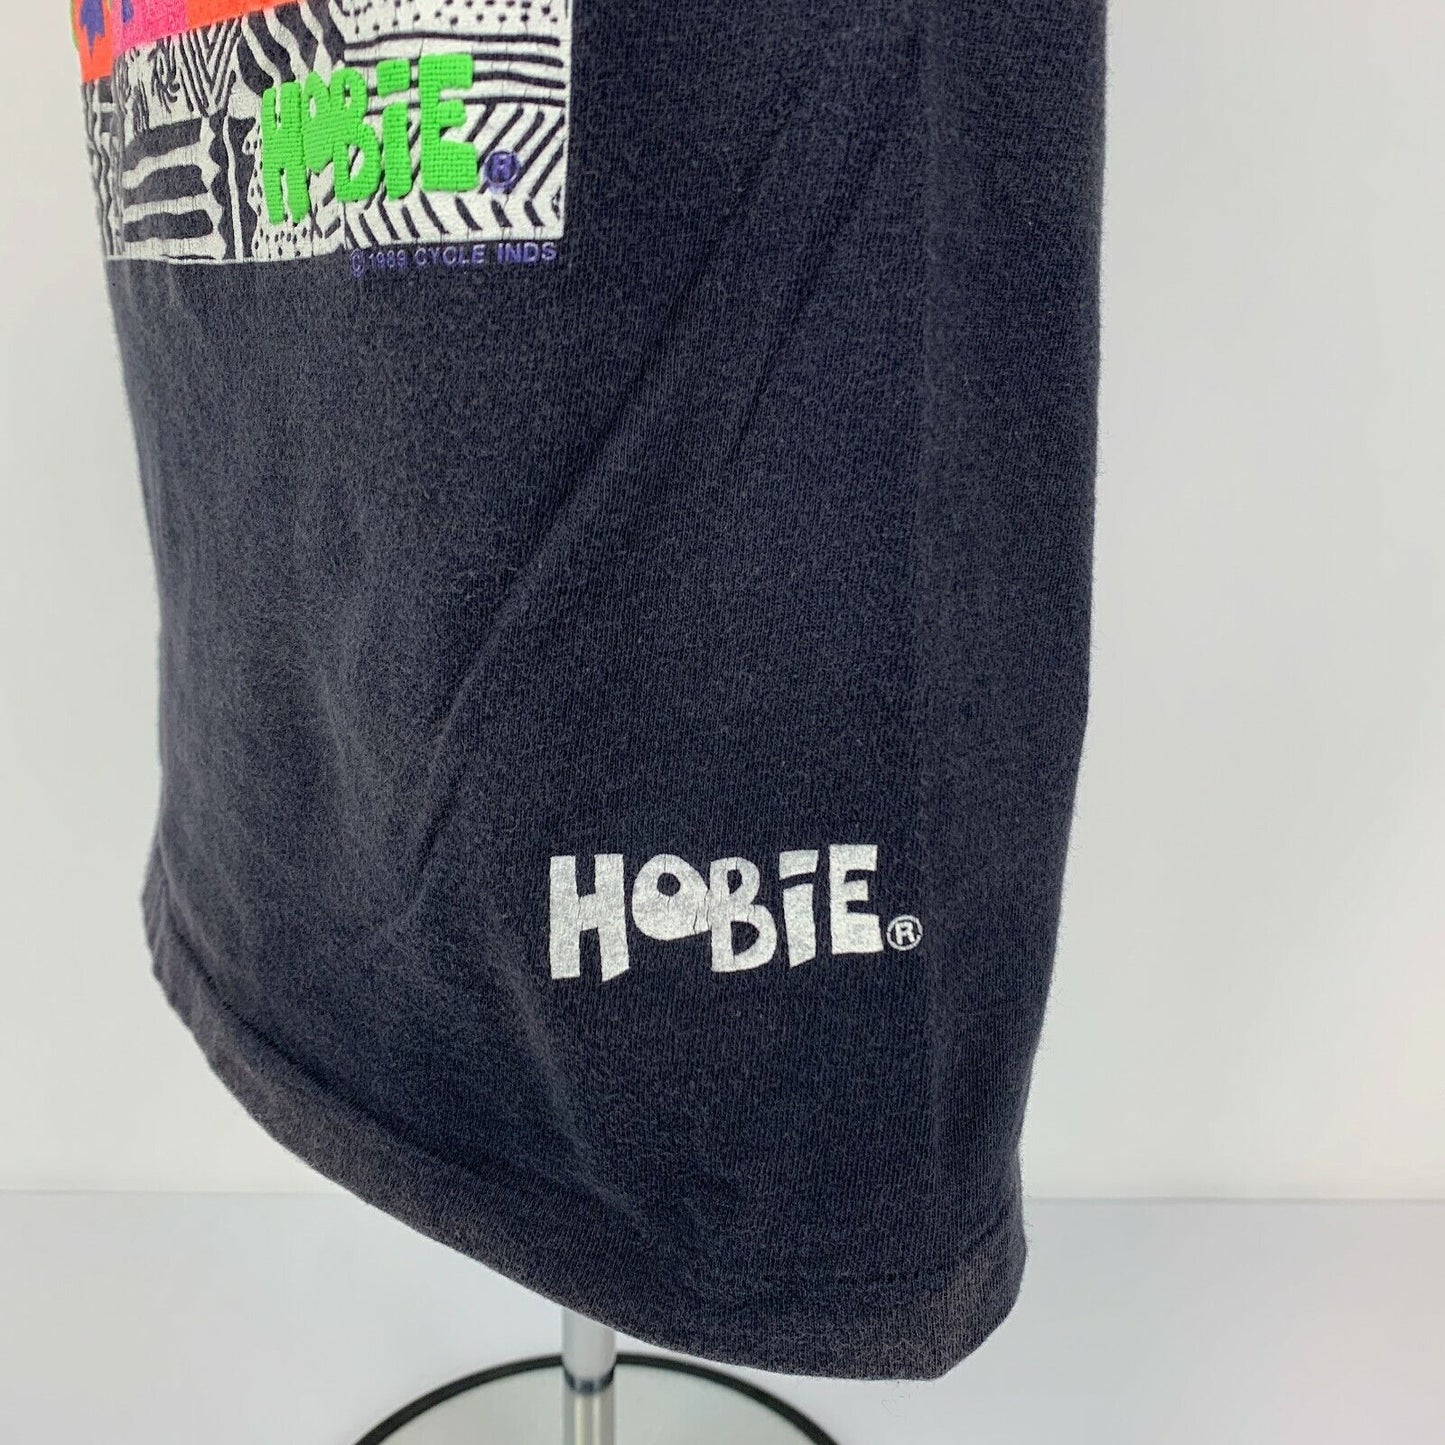 Hobie Fish Beach Surfing Vintage 80s T Shirt Small Neon Puffy Paint Made In USA